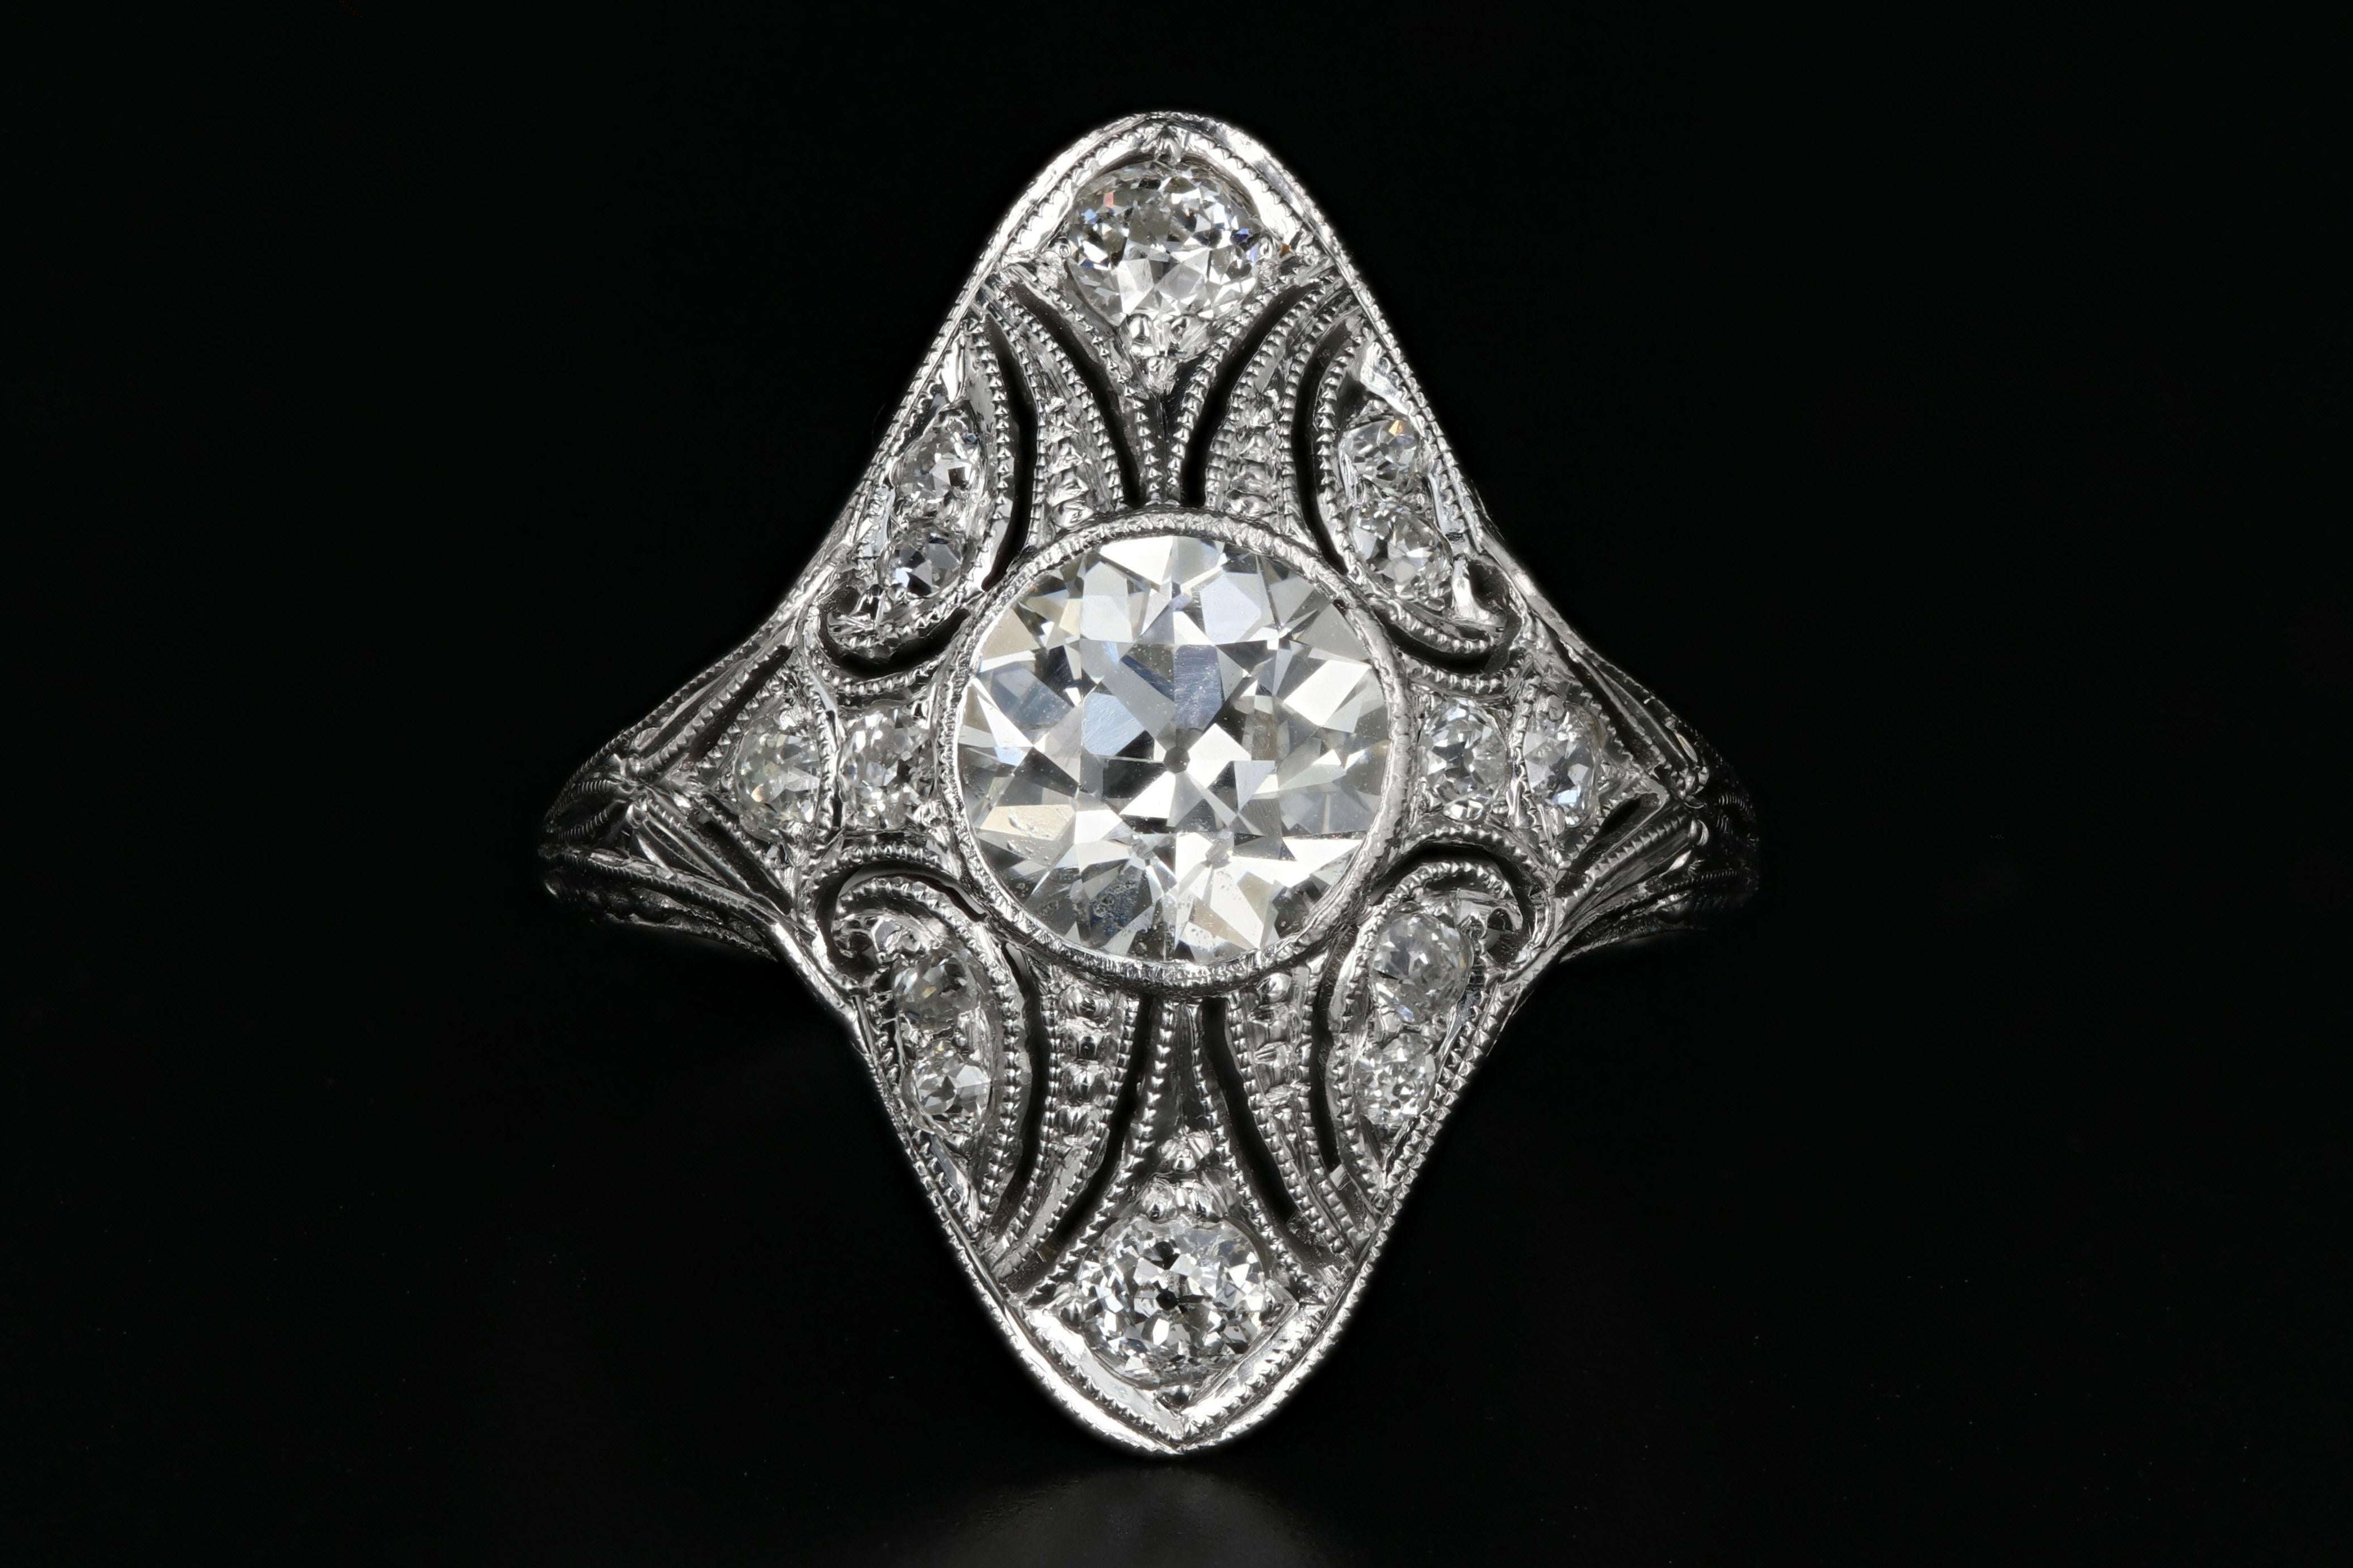 Era: Art Deco

Hallmarks: 18K

Composition: 18K White Gold

Primary Stone: Old European Cut Diamond

Stone Carat Weight: 1.15 Carats

Color/ Clarity: I / VS2

Accent Stone: Old European Cut Diamonds

Accent Stone Carat Weight: .30 Carats

Color/